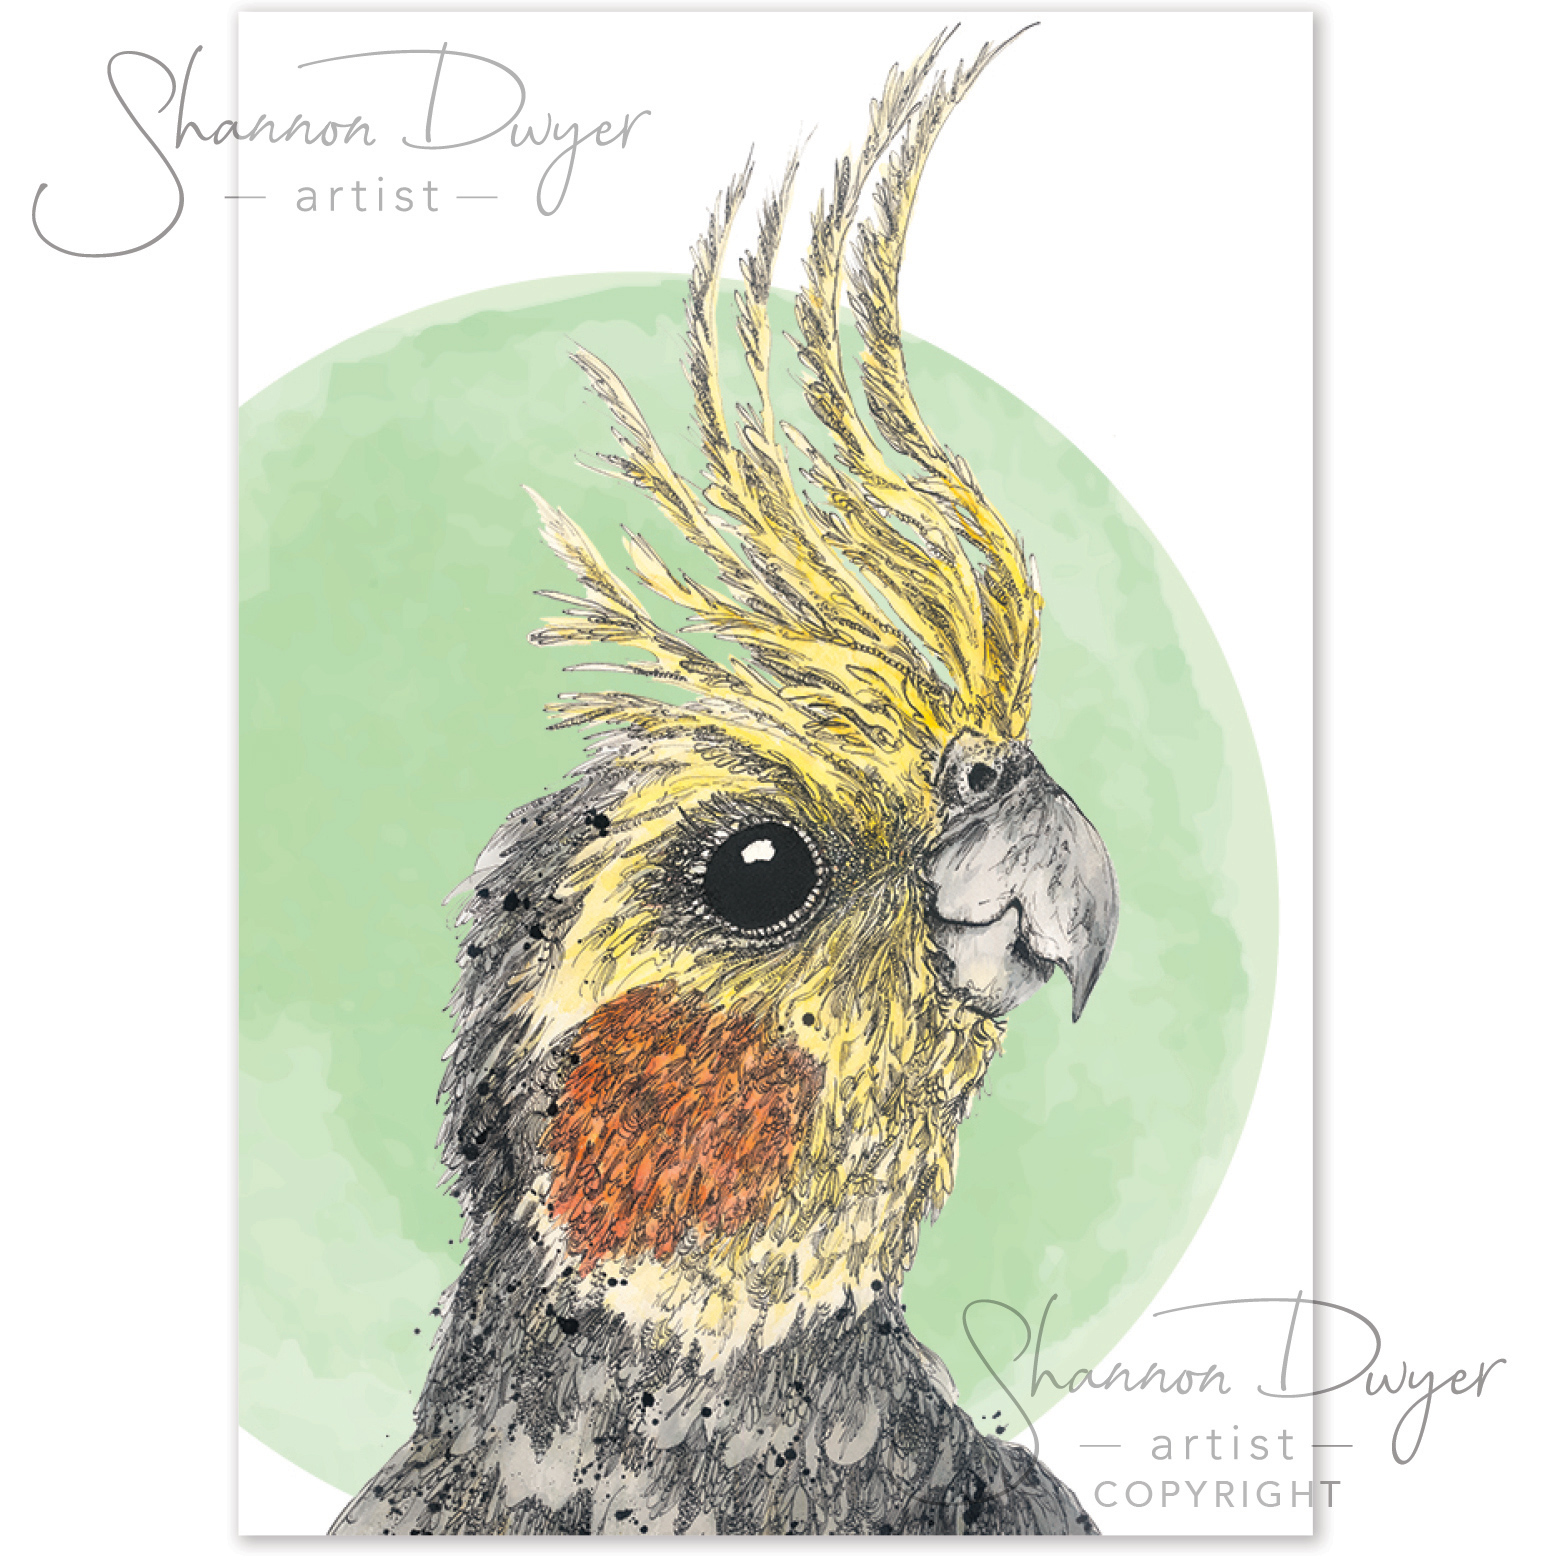 'Chirpy' POP Greeting Card artwork of a Cockatiel by Shannon Dwyer Artist